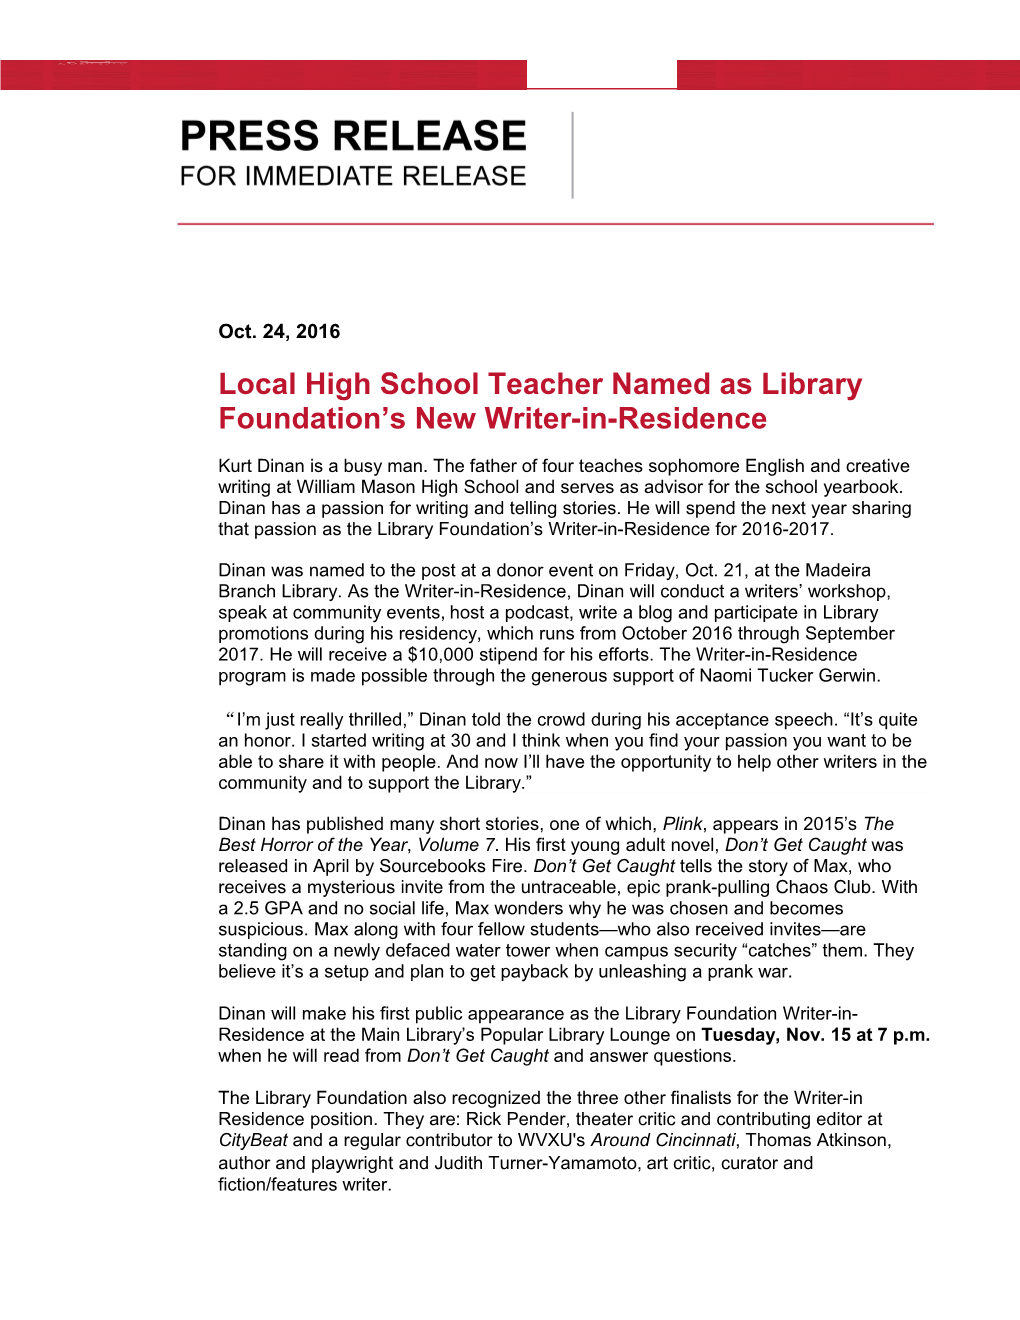 Local High School Teacher Named As Library Foundation S New Writer-In-Residence